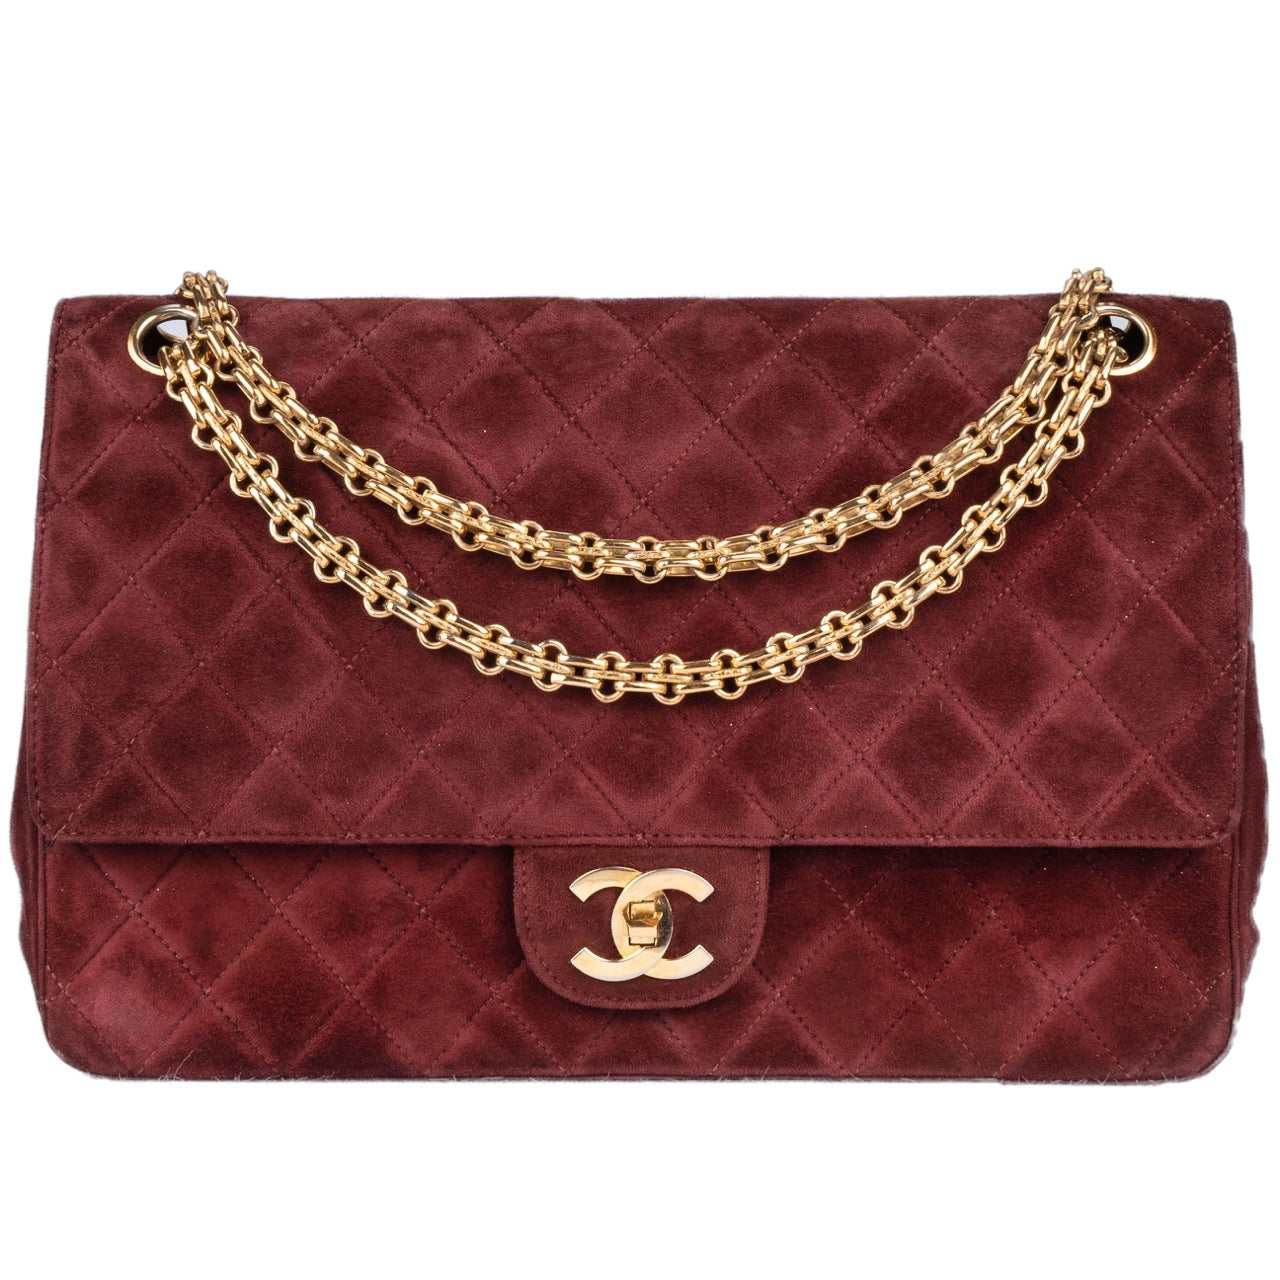 Chanel Quilted Suede Leather Double Flap Bag